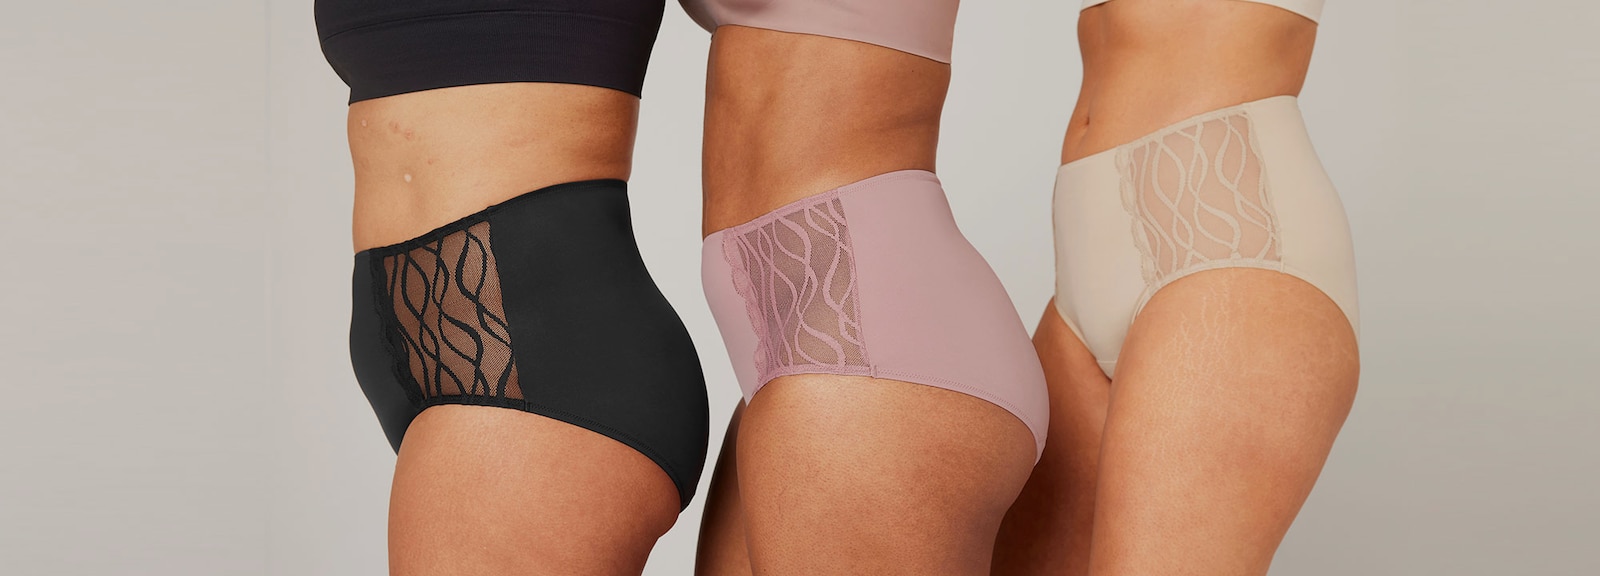 TENA-Range-colors-washable-incontinence-underwear-banner-overlay.png                                                                                                                                                                                                                                                                                                                                                                                                                                                